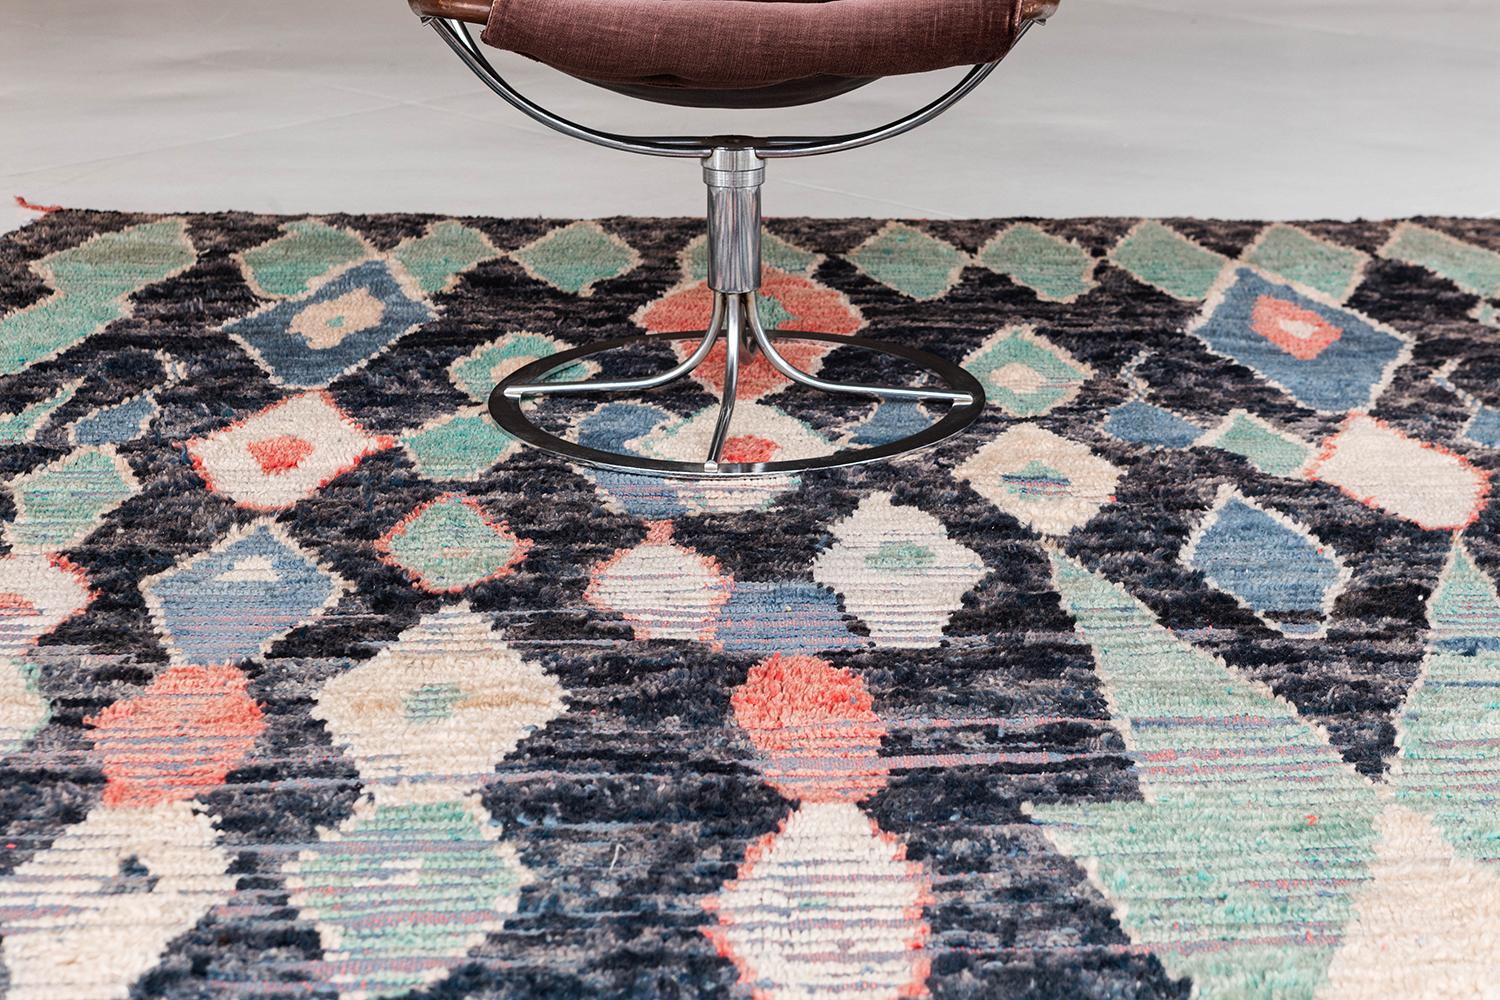 This vintage Azilal from Morocco is made of beautiful saturated wools into a one of kind rug. The colorful pile weave consists of tribal diamond shapes that translate into a unique and contemporary art piece. This antique rug from Morocco is sure to